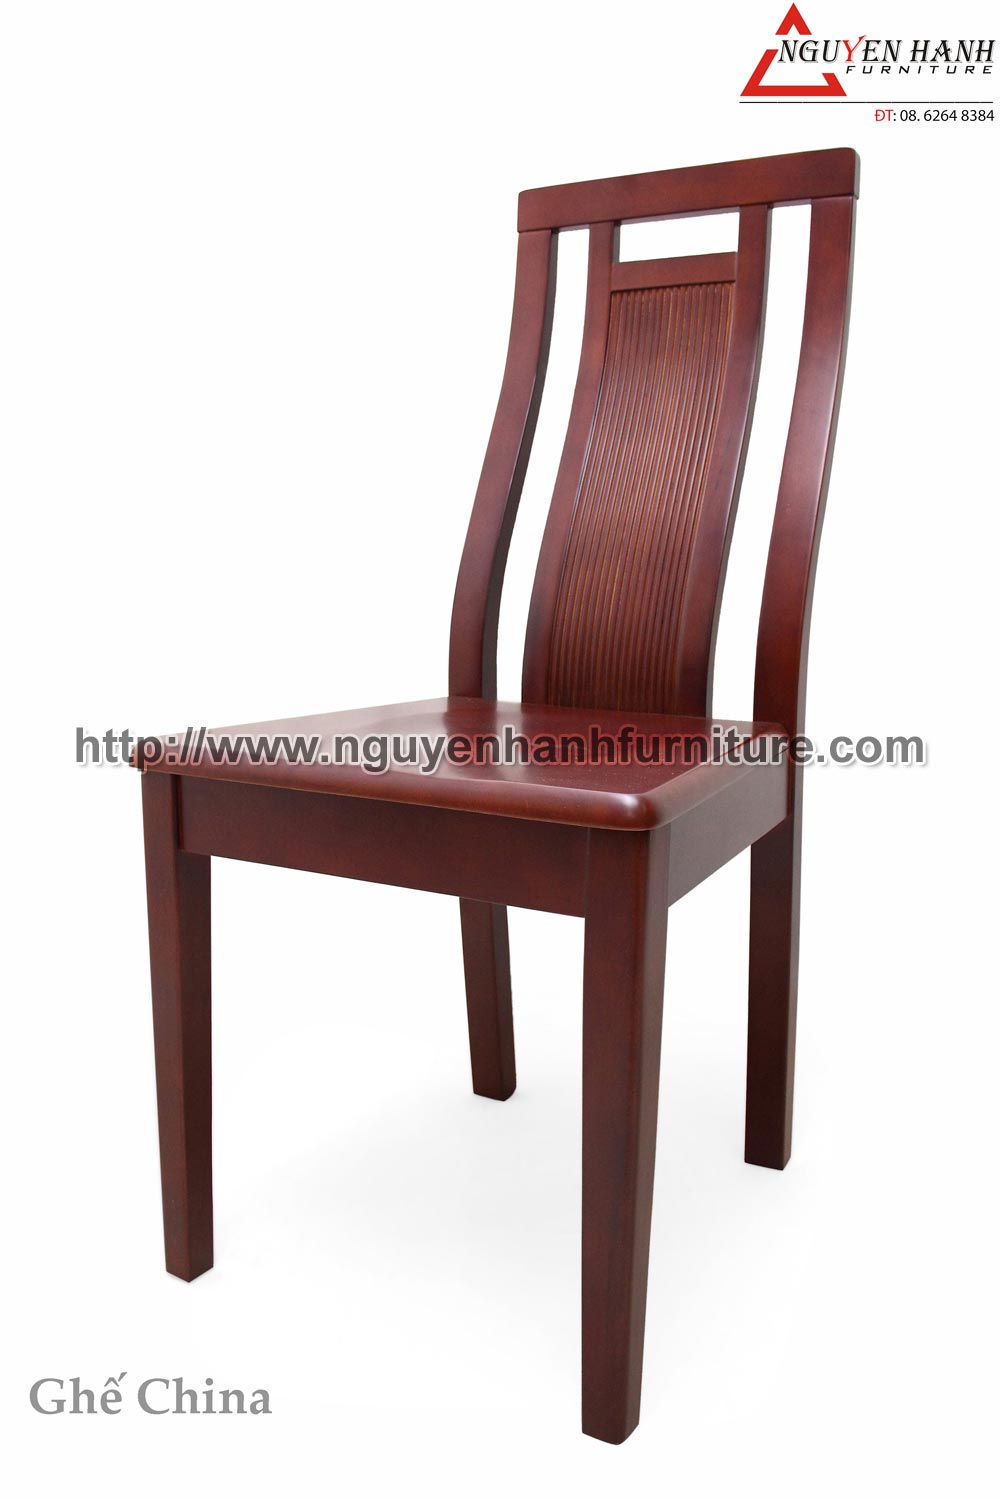 Name product: china chair